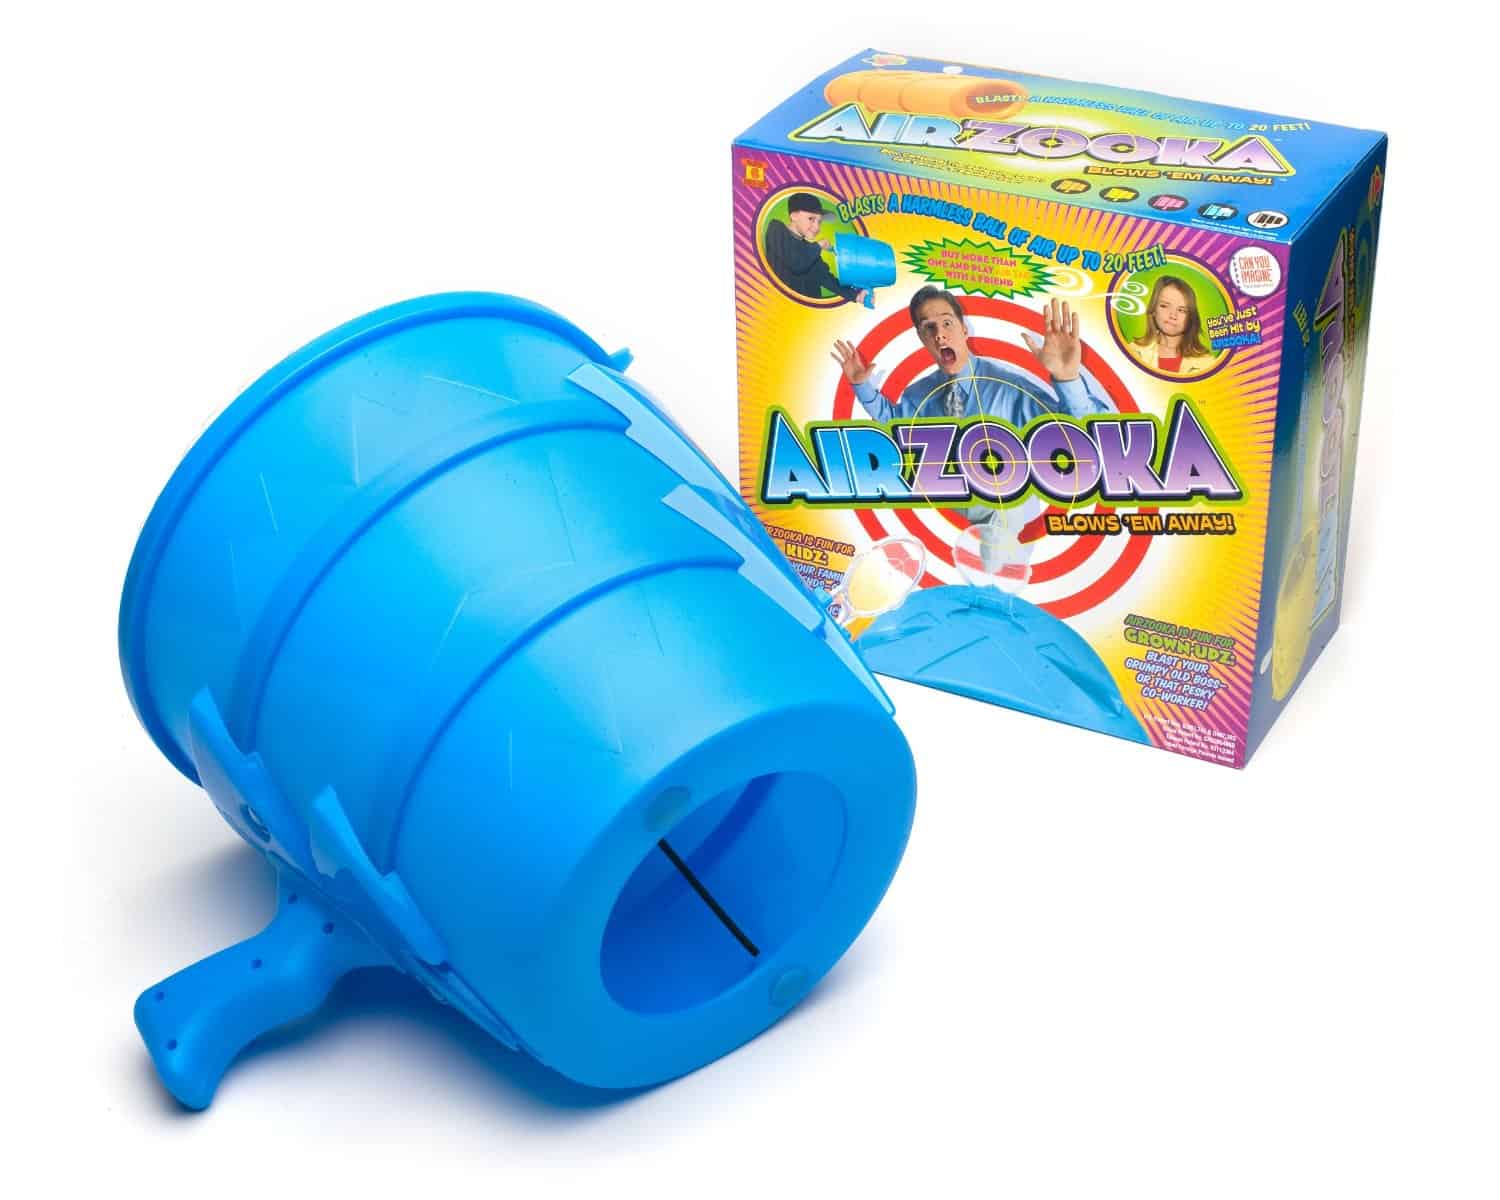 Airzooka Blue With Colorful Box Package